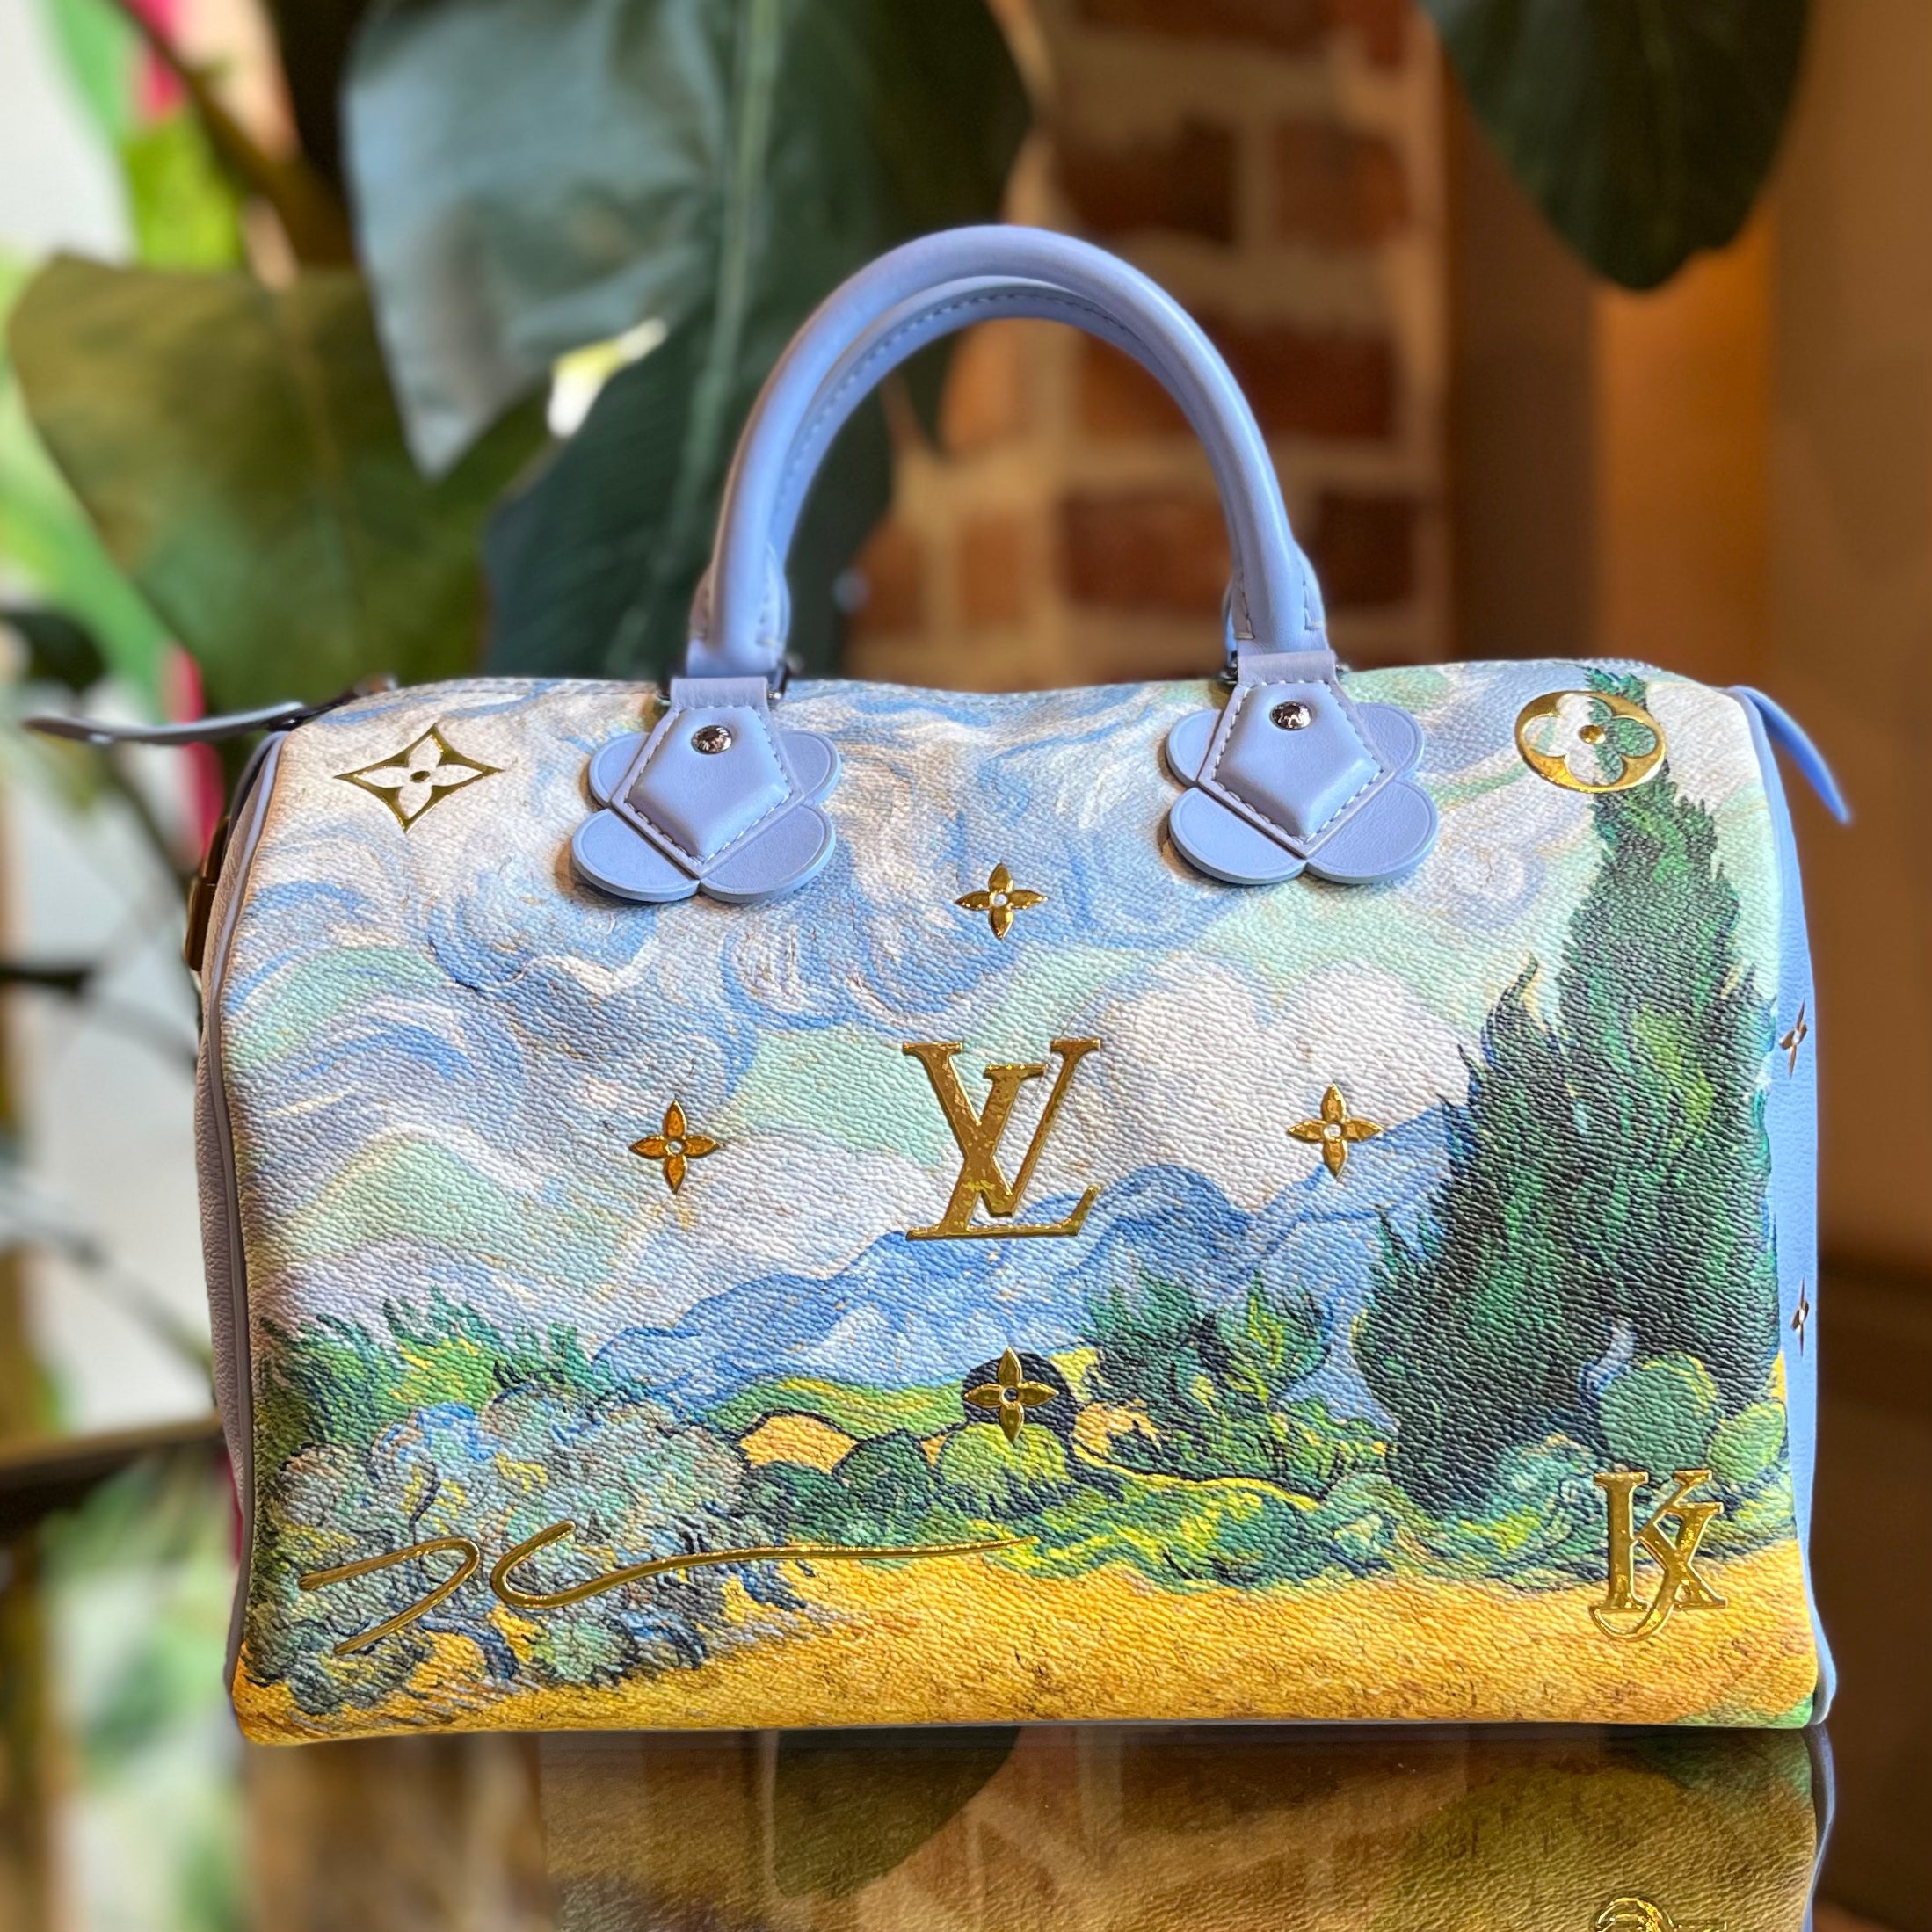 Replicanista - Limited Edition Louis Vuitton Masters Van Gogh by Jeff Koons  #replicanista #lvbag #speedy #masters #vangogh #lvspeedy #louisvuitton  #bagoftheday #limitededition #jeffkoons